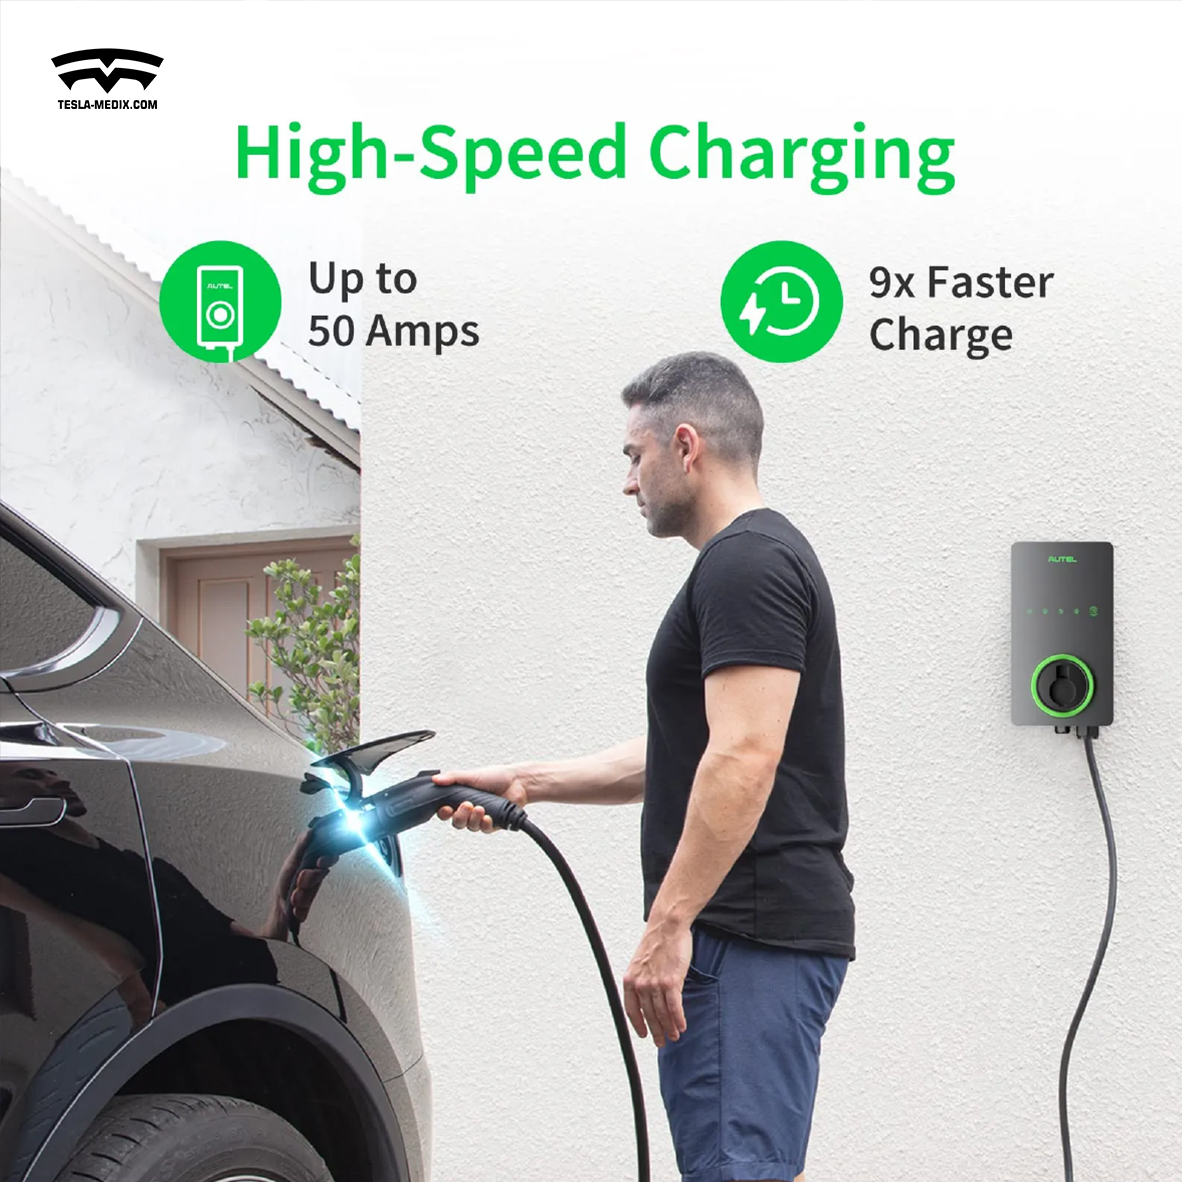 Model 3/Y/S/X US - MaxiCharger up to 50Amp, 240V, Indoor/Outdoor Car Charging Station with Level 2